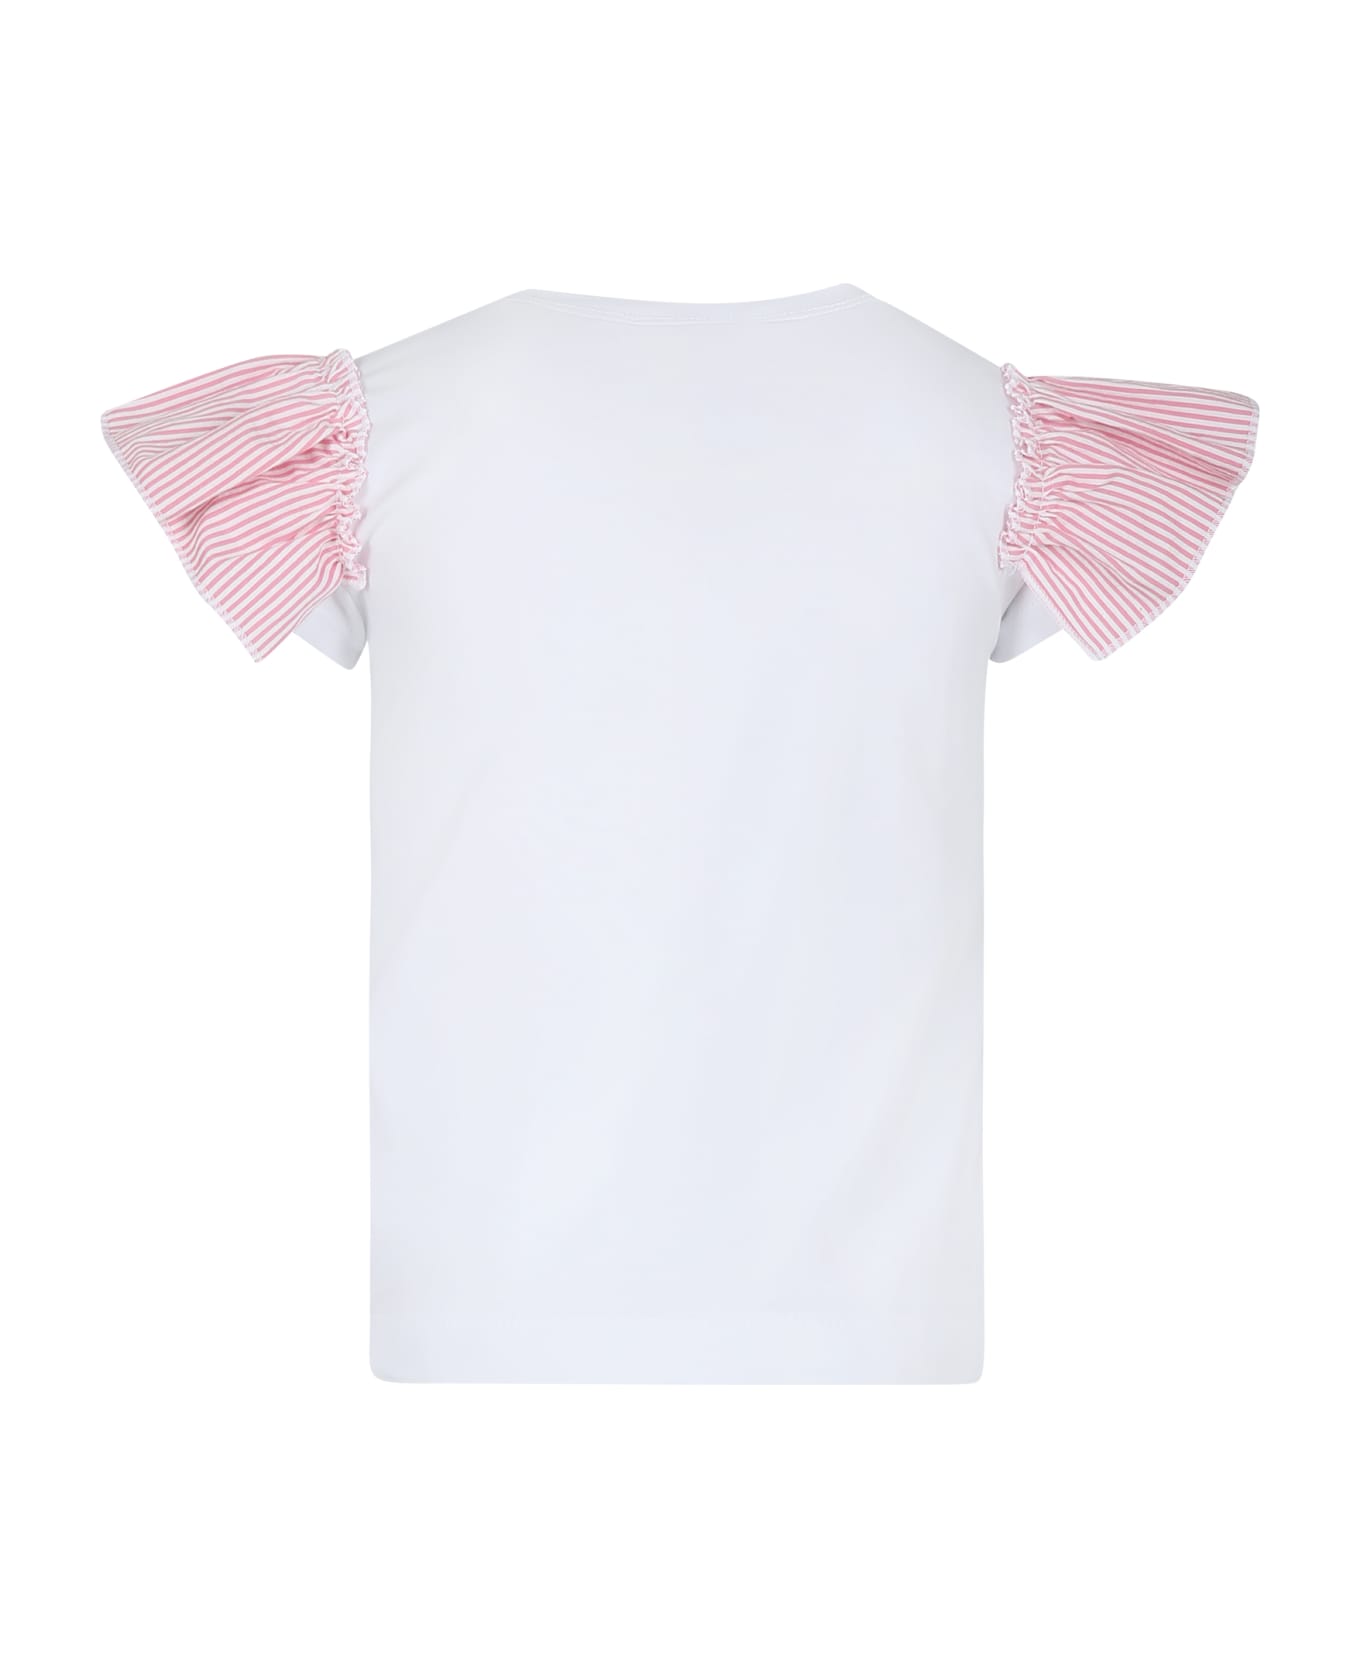 Monnalisa White T-shirt For Girl With Pink Heart - White